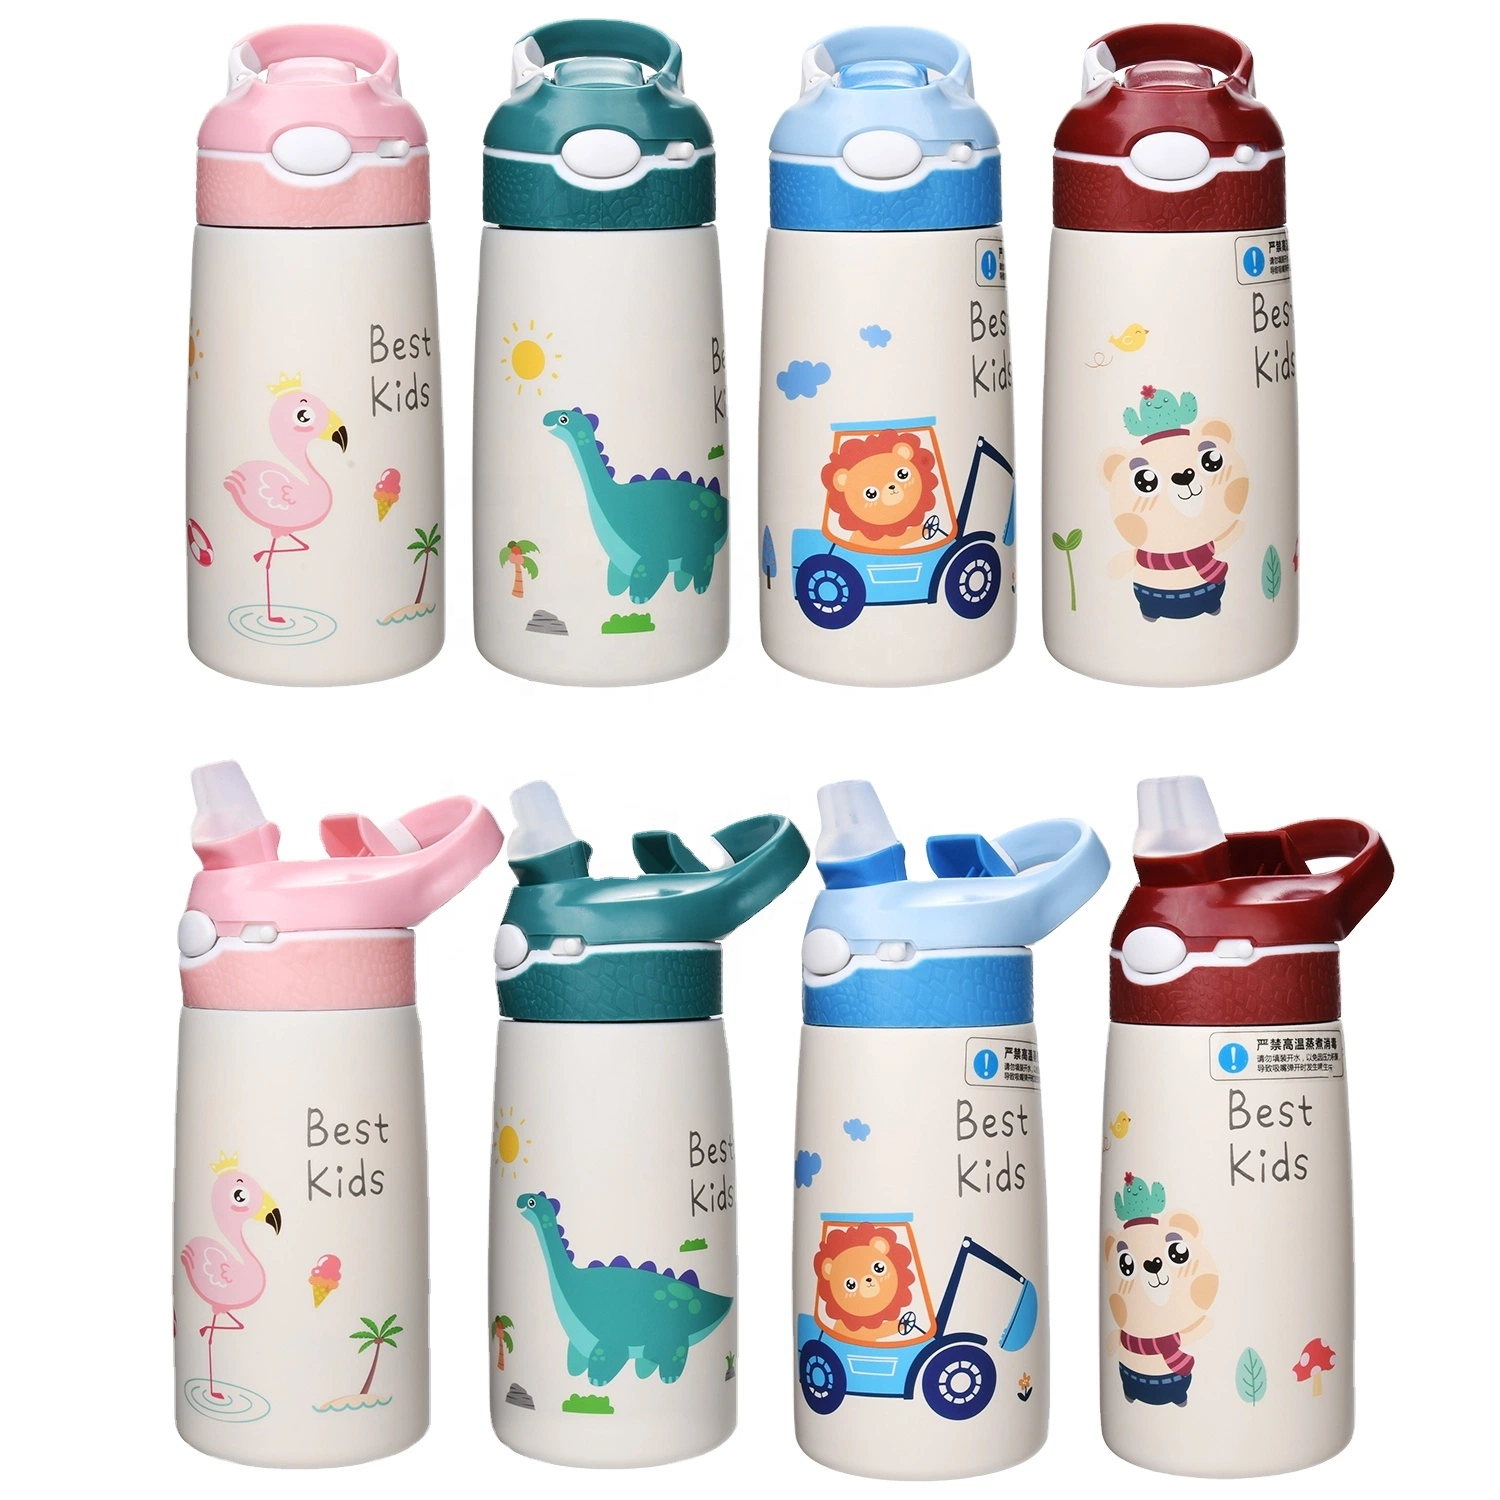 Aohea Kids Insulated Drinking Bottle Water for Student School Cute Custom Water Bottle Glass Perfume Jar Mug Plastic Products Glassware Cup Packaging Cosmetic P